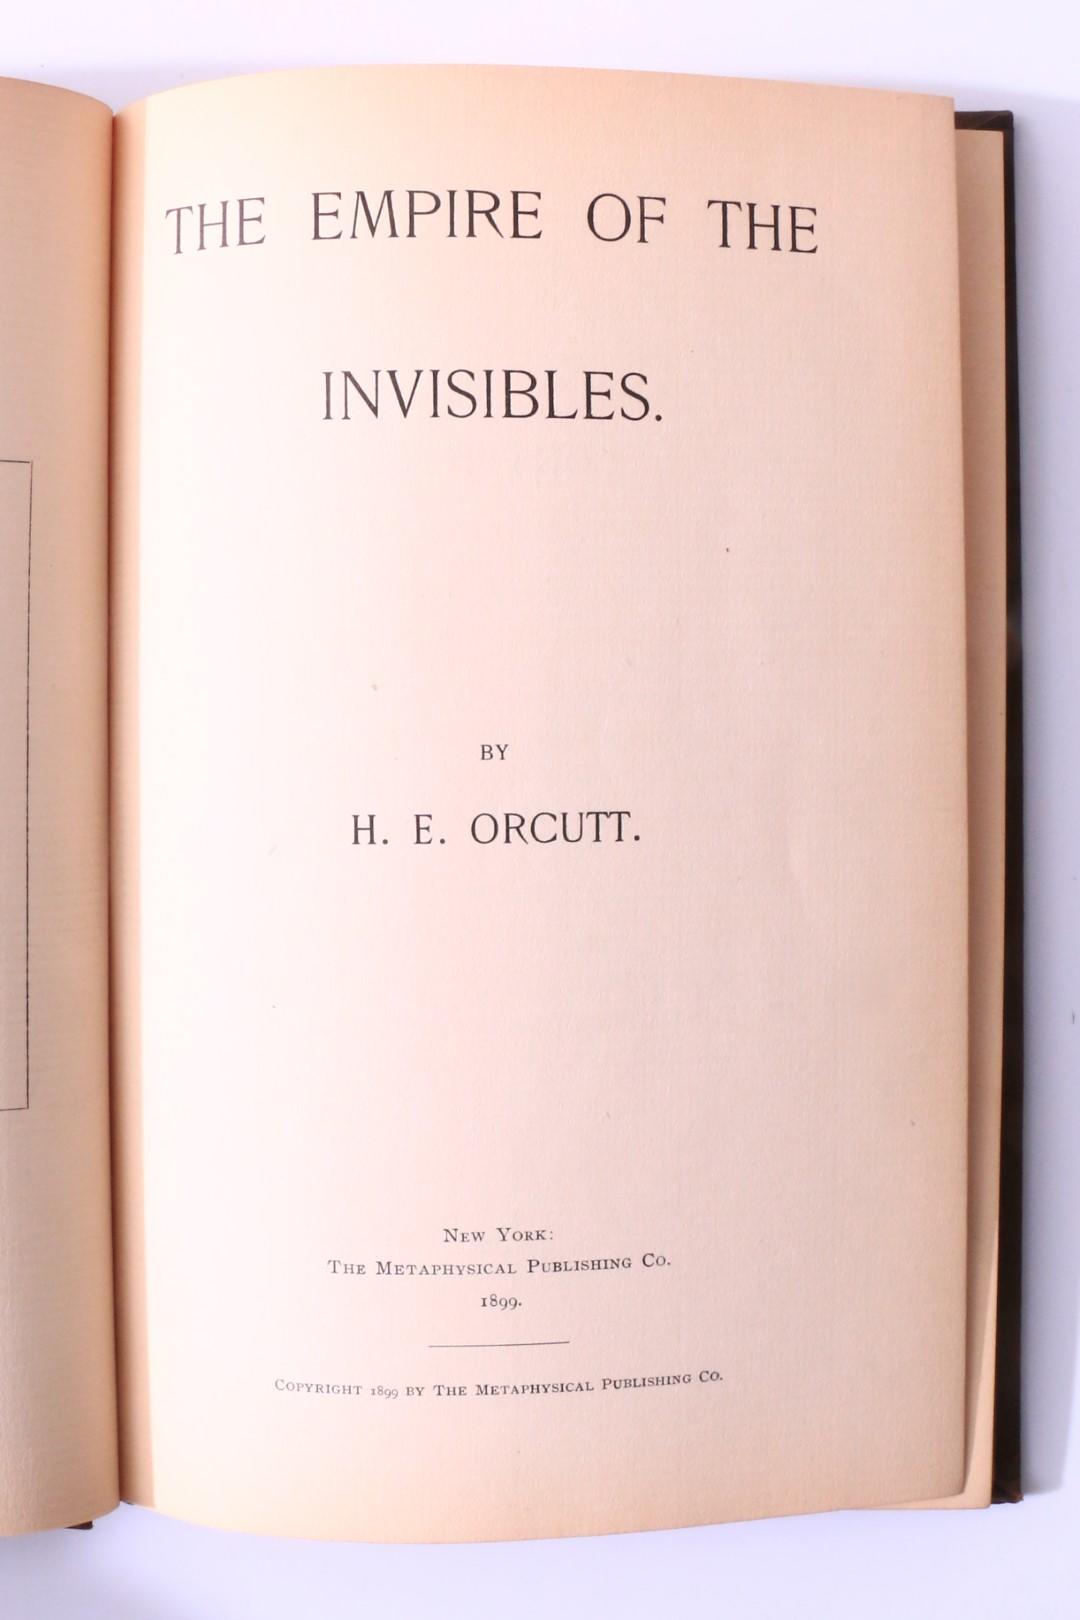 H.E. Orcutt - The Empire of the Invisibles - The Metaphysical Publishing Co., 1899, First Edition.